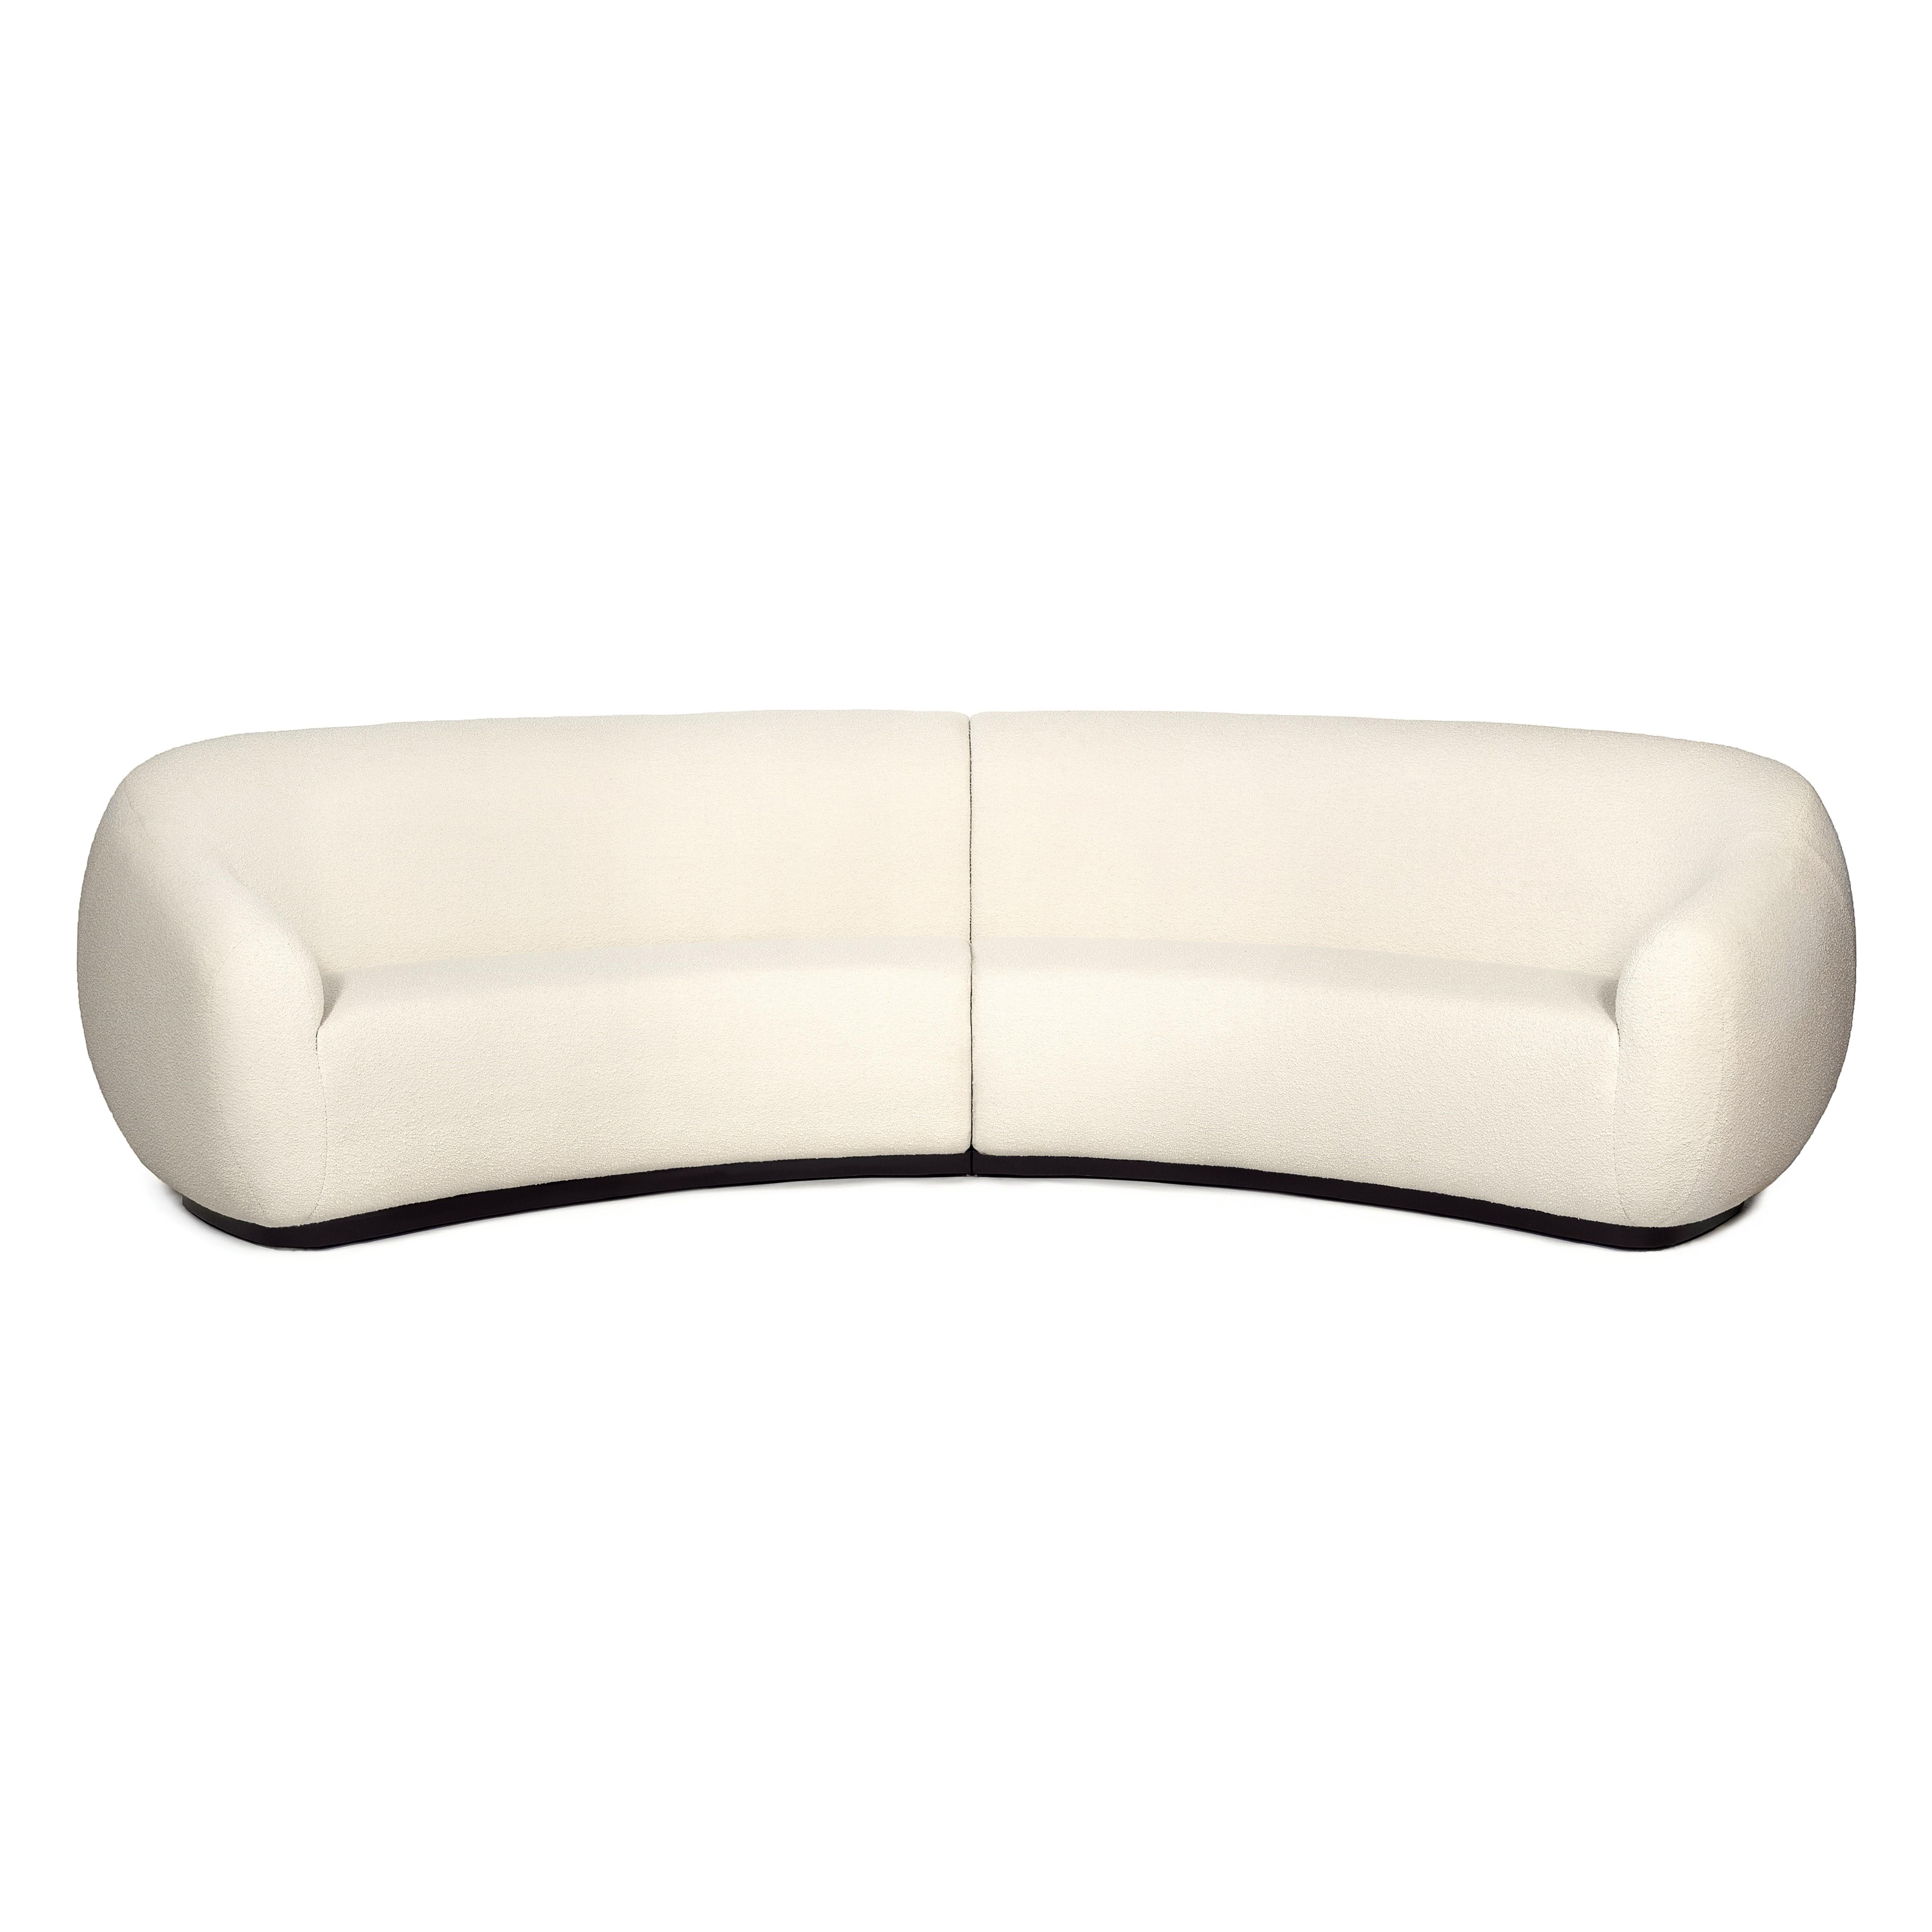 The Niemeyer II round sofa is named after the Brazilian Architect Oscar Niemeyer whose Architecture was spread like sculptural poetry in the History of humankind.
The rounded lines of the sofa are influenced by the remarkable ‘Casa das Canoas’